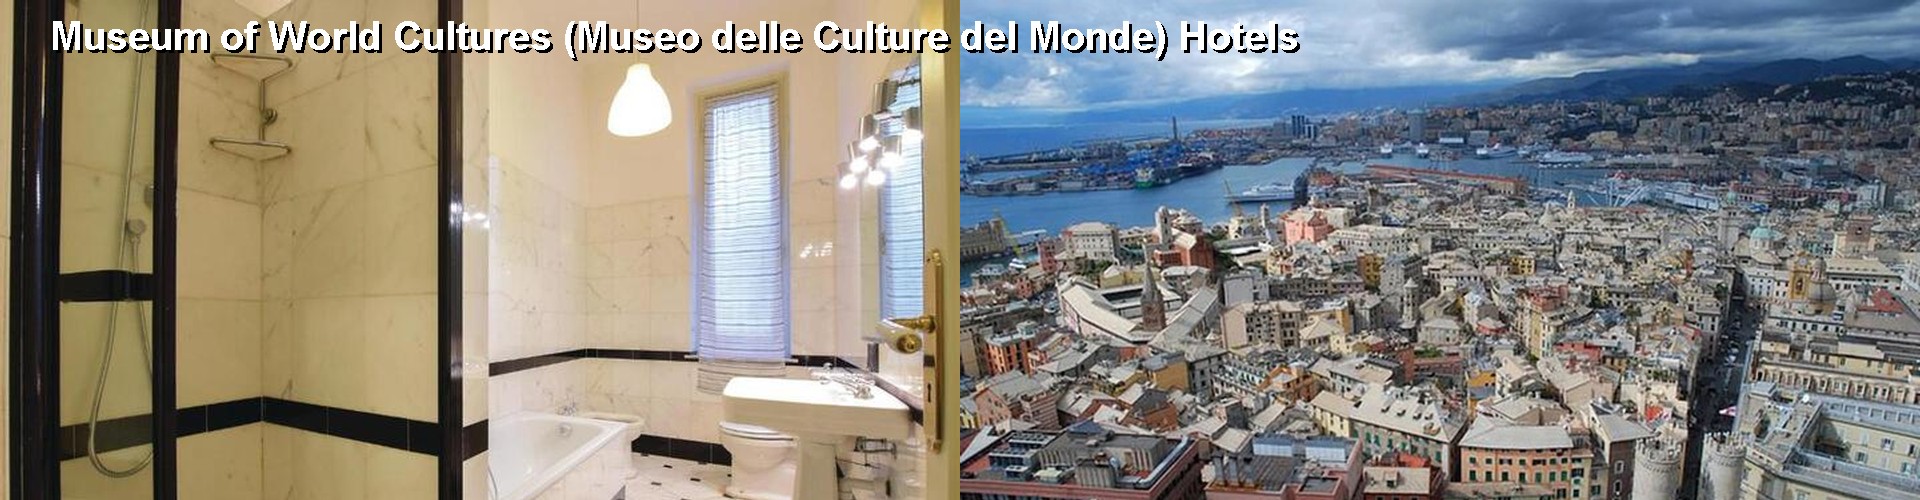 5 Best Hotels near Museum of World Cultures (Museo delle Culture del Monde)